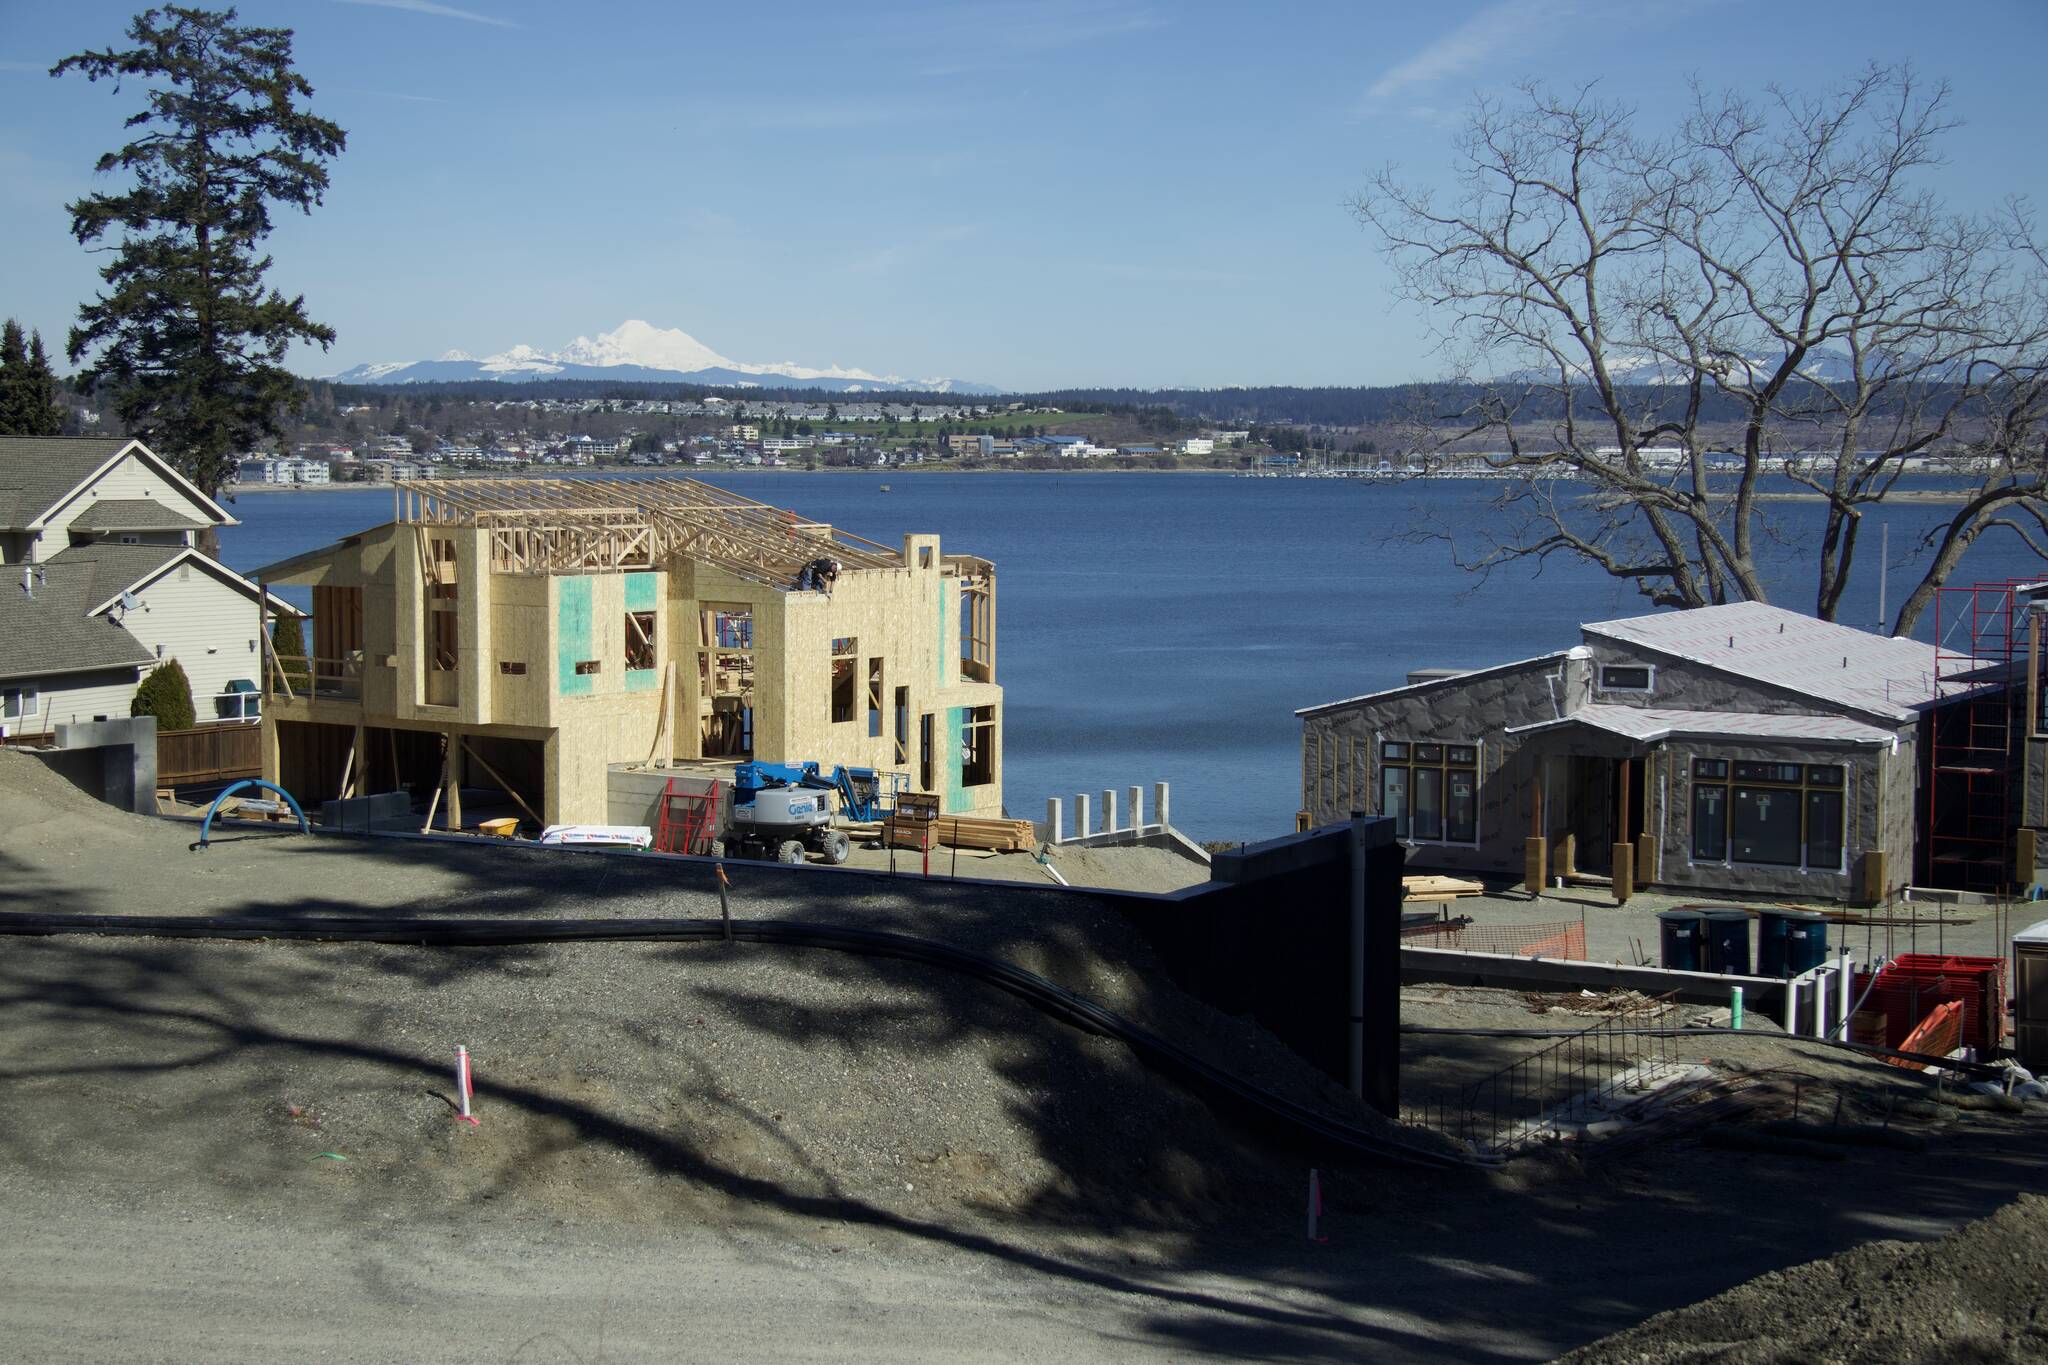 Photos by Rachel Rosen/Whidbey News-Times
A total of 11 houses are set to be built at the Scenic Heights Development.